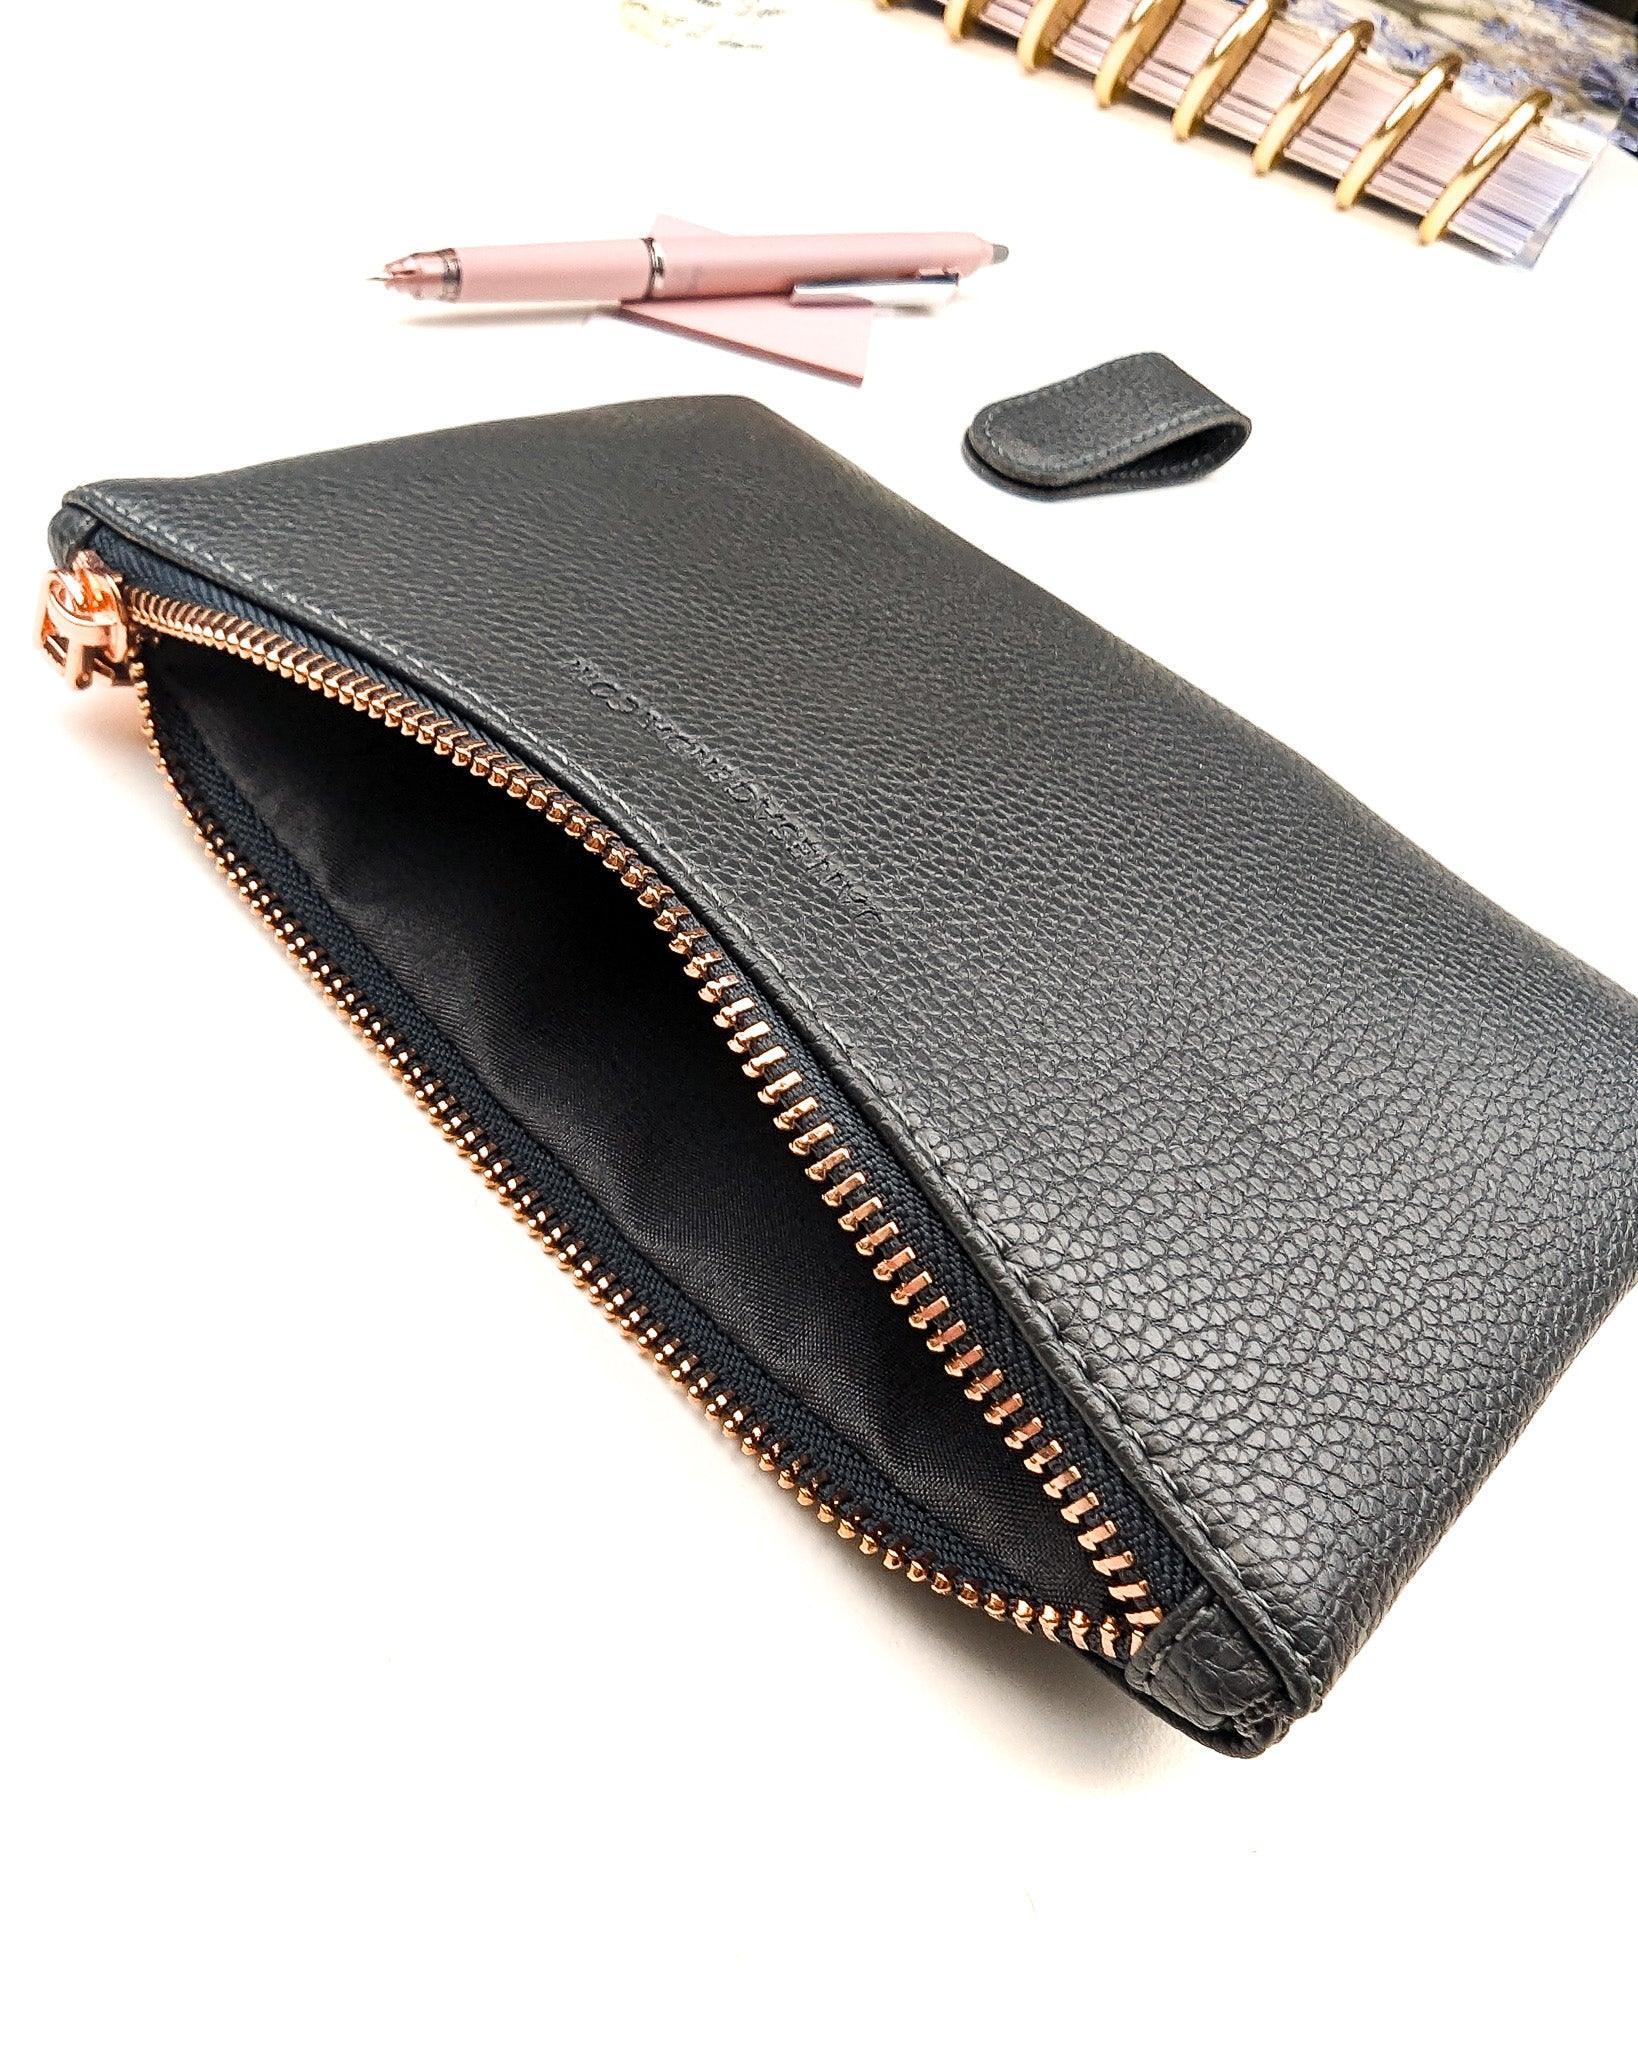 Vegan leather pen and accessories pouch in a soft pebble grain finish with a rose gold metal zipper by Jane's Agenda.